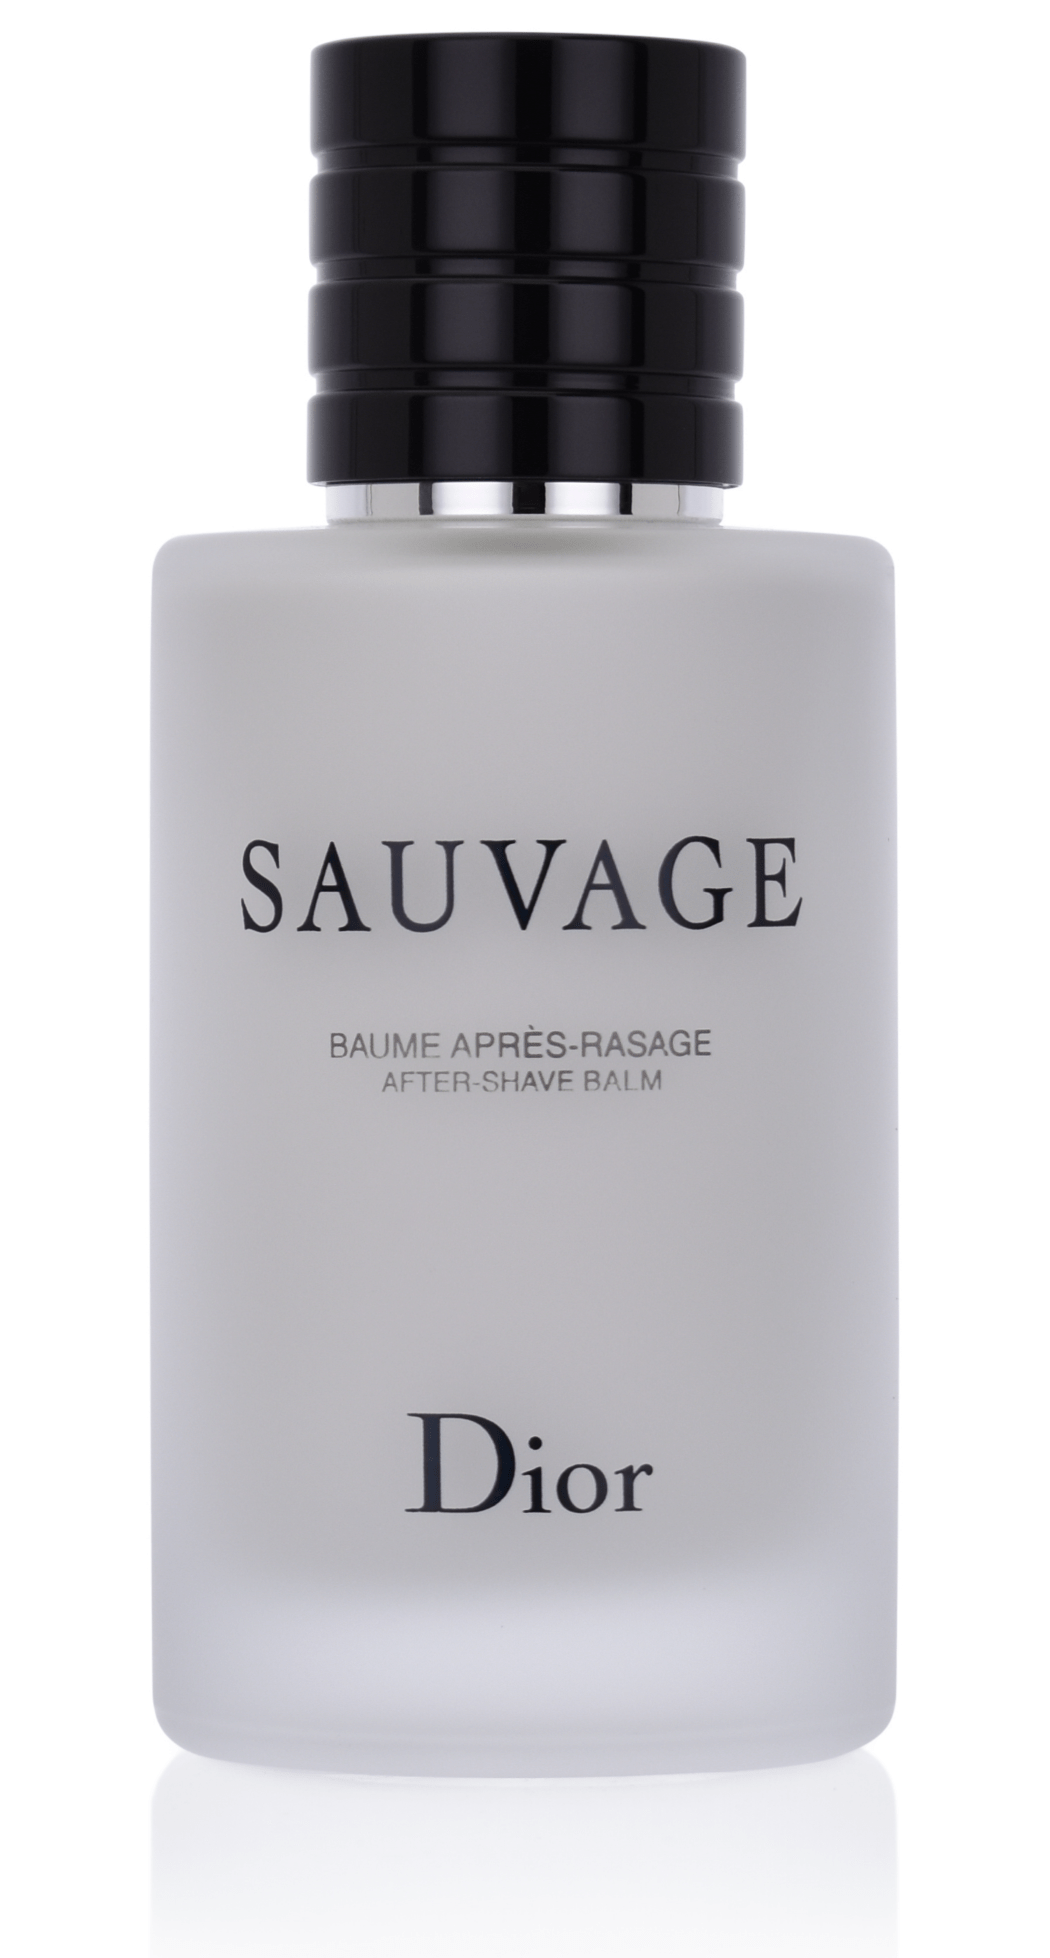 Dior Sauvage 100 ml After Shave Balm